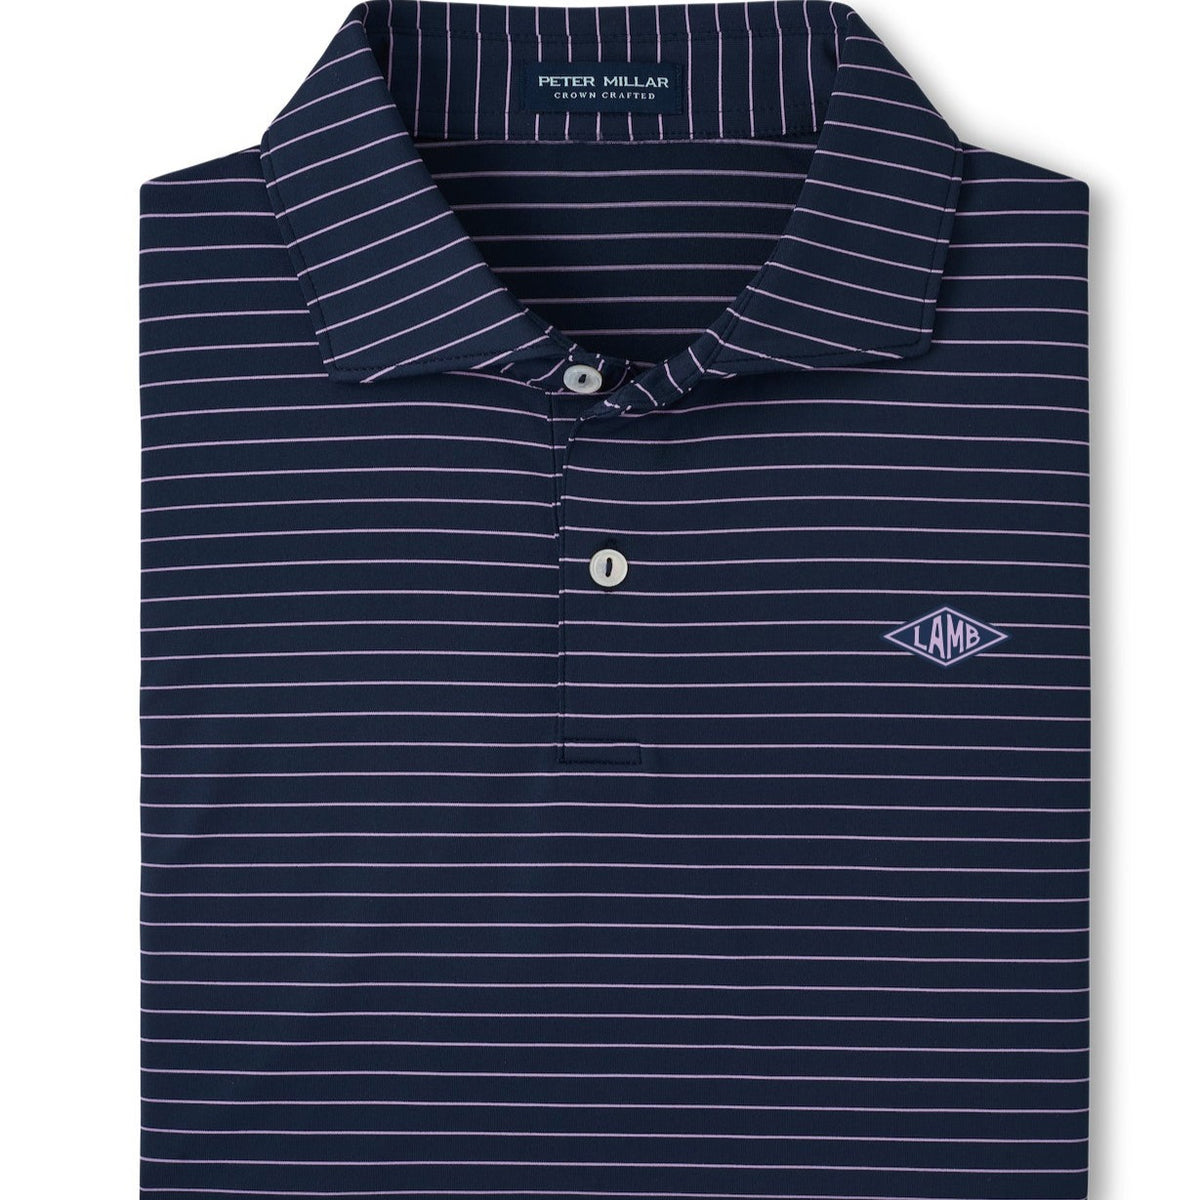 Peter Millar Duet Performance Jersey Polo - Navy - Lamb Crafted